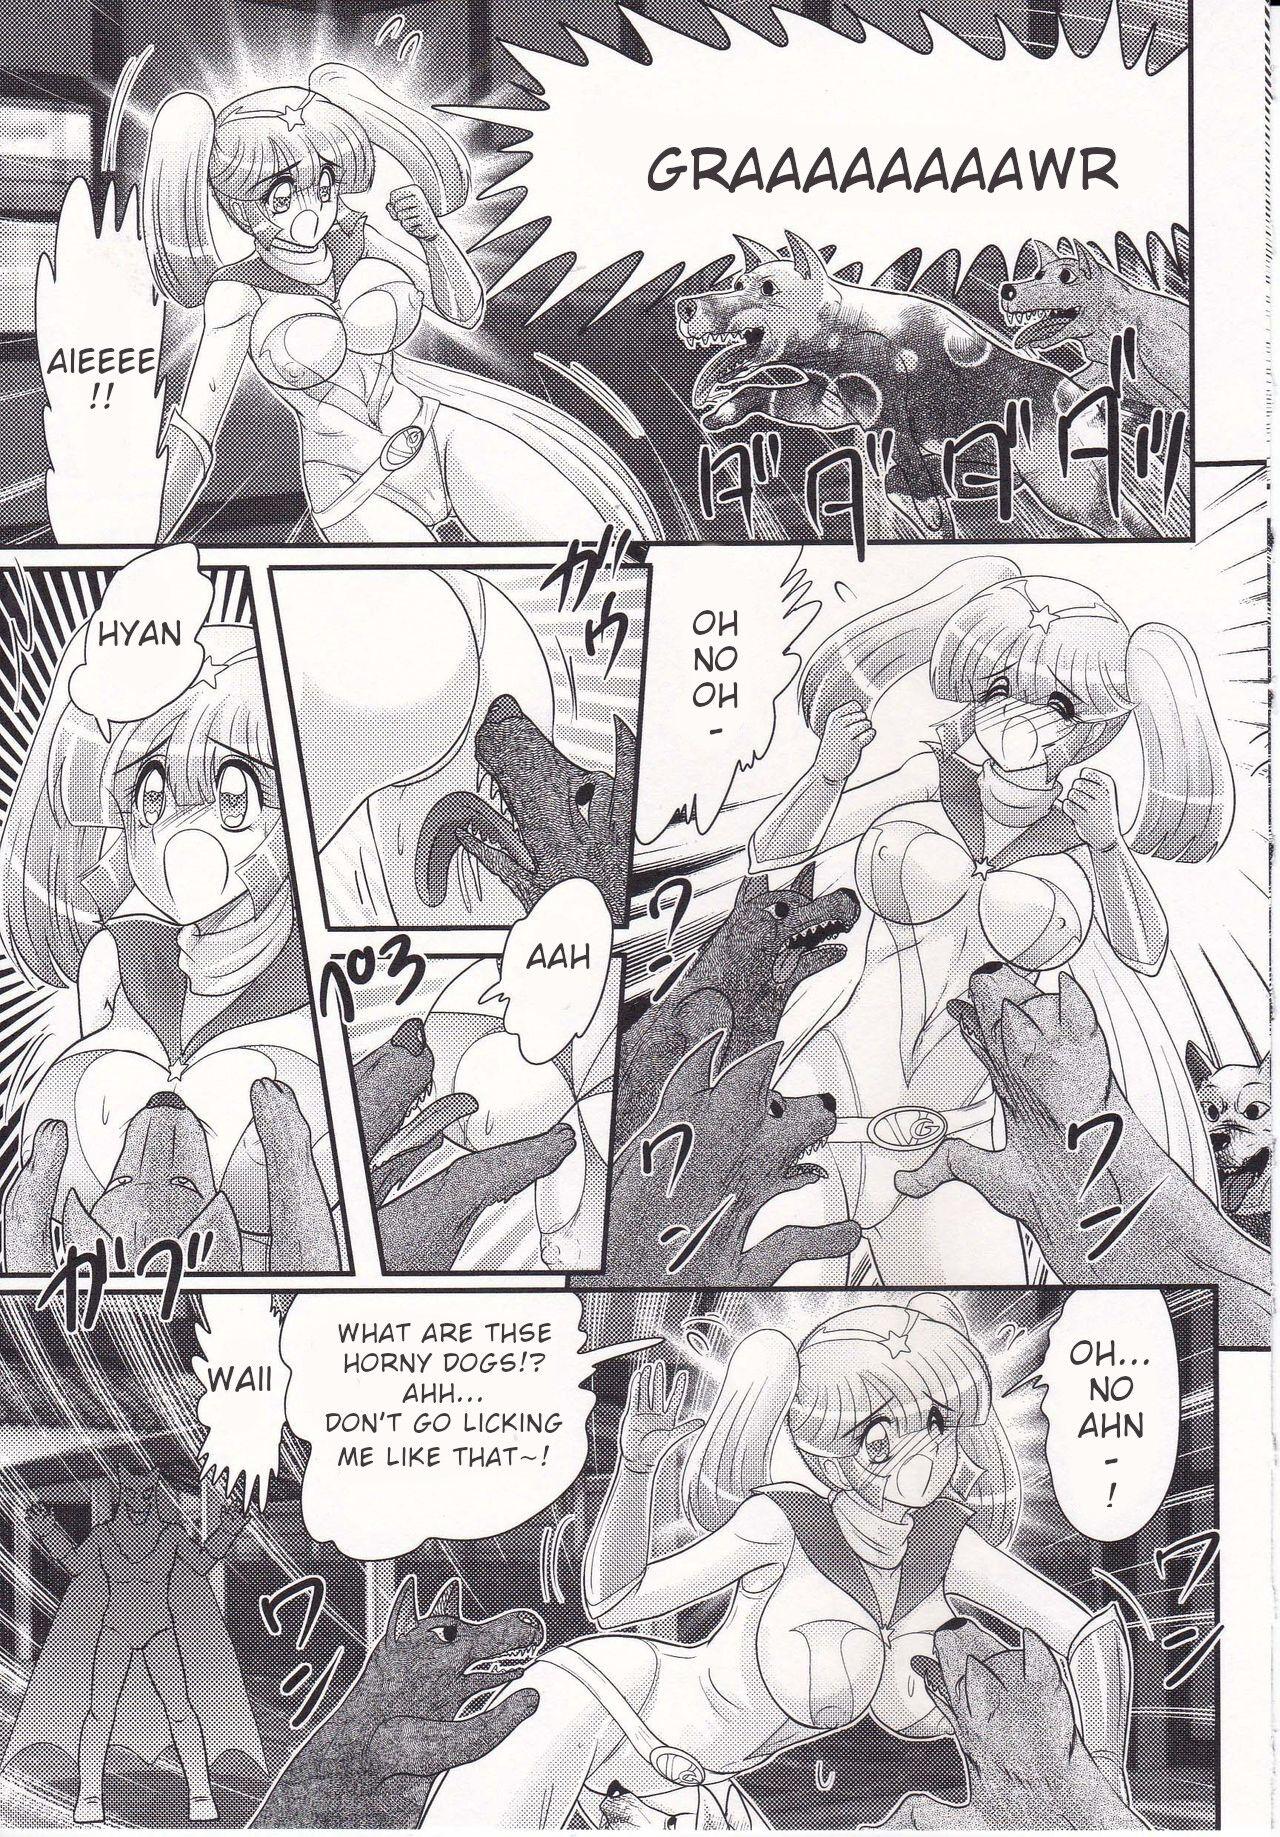 Actress Amazing Victory Girl Chapter 5 Closeups - Page 3